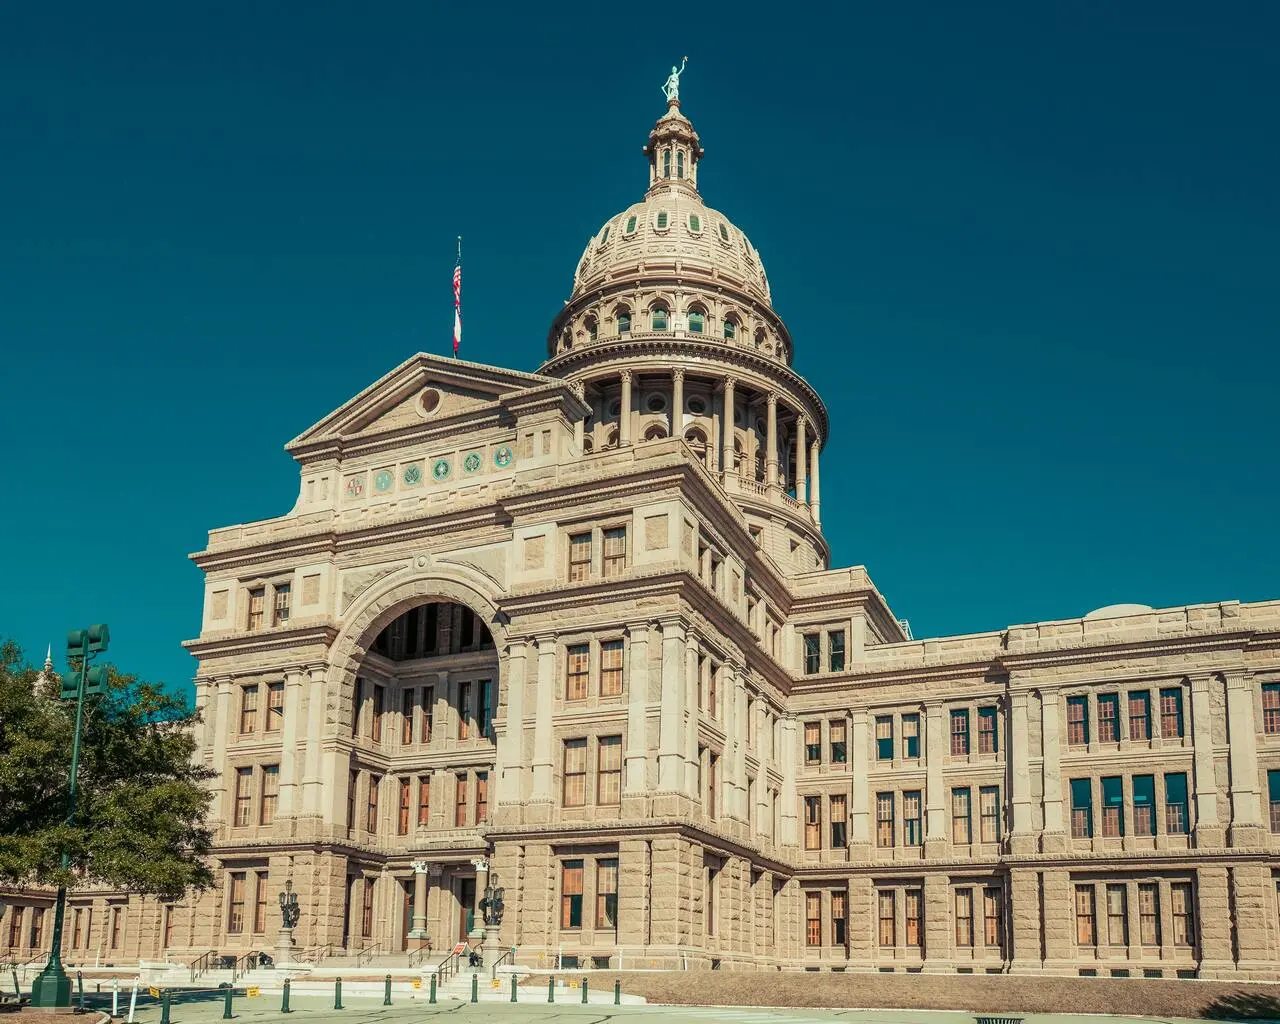 Texas Introduces Stricter Requirements for Security Officers